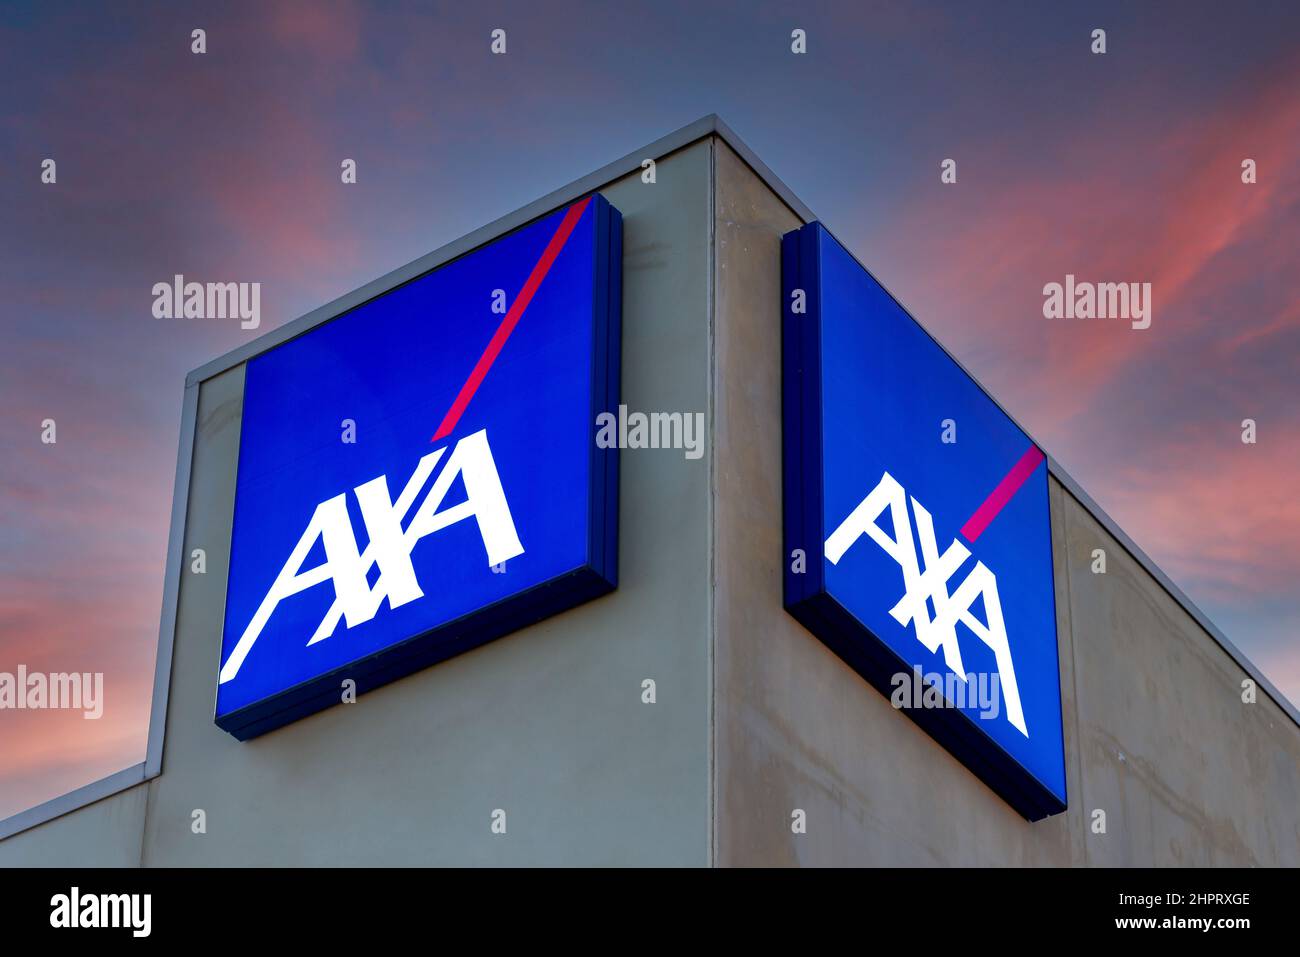 Fossano, Italy - February 22, 2022: Axa logo on illuminated signs on building on colorful after sunset sky,  Axa is French insurance and bank services Stock Photo